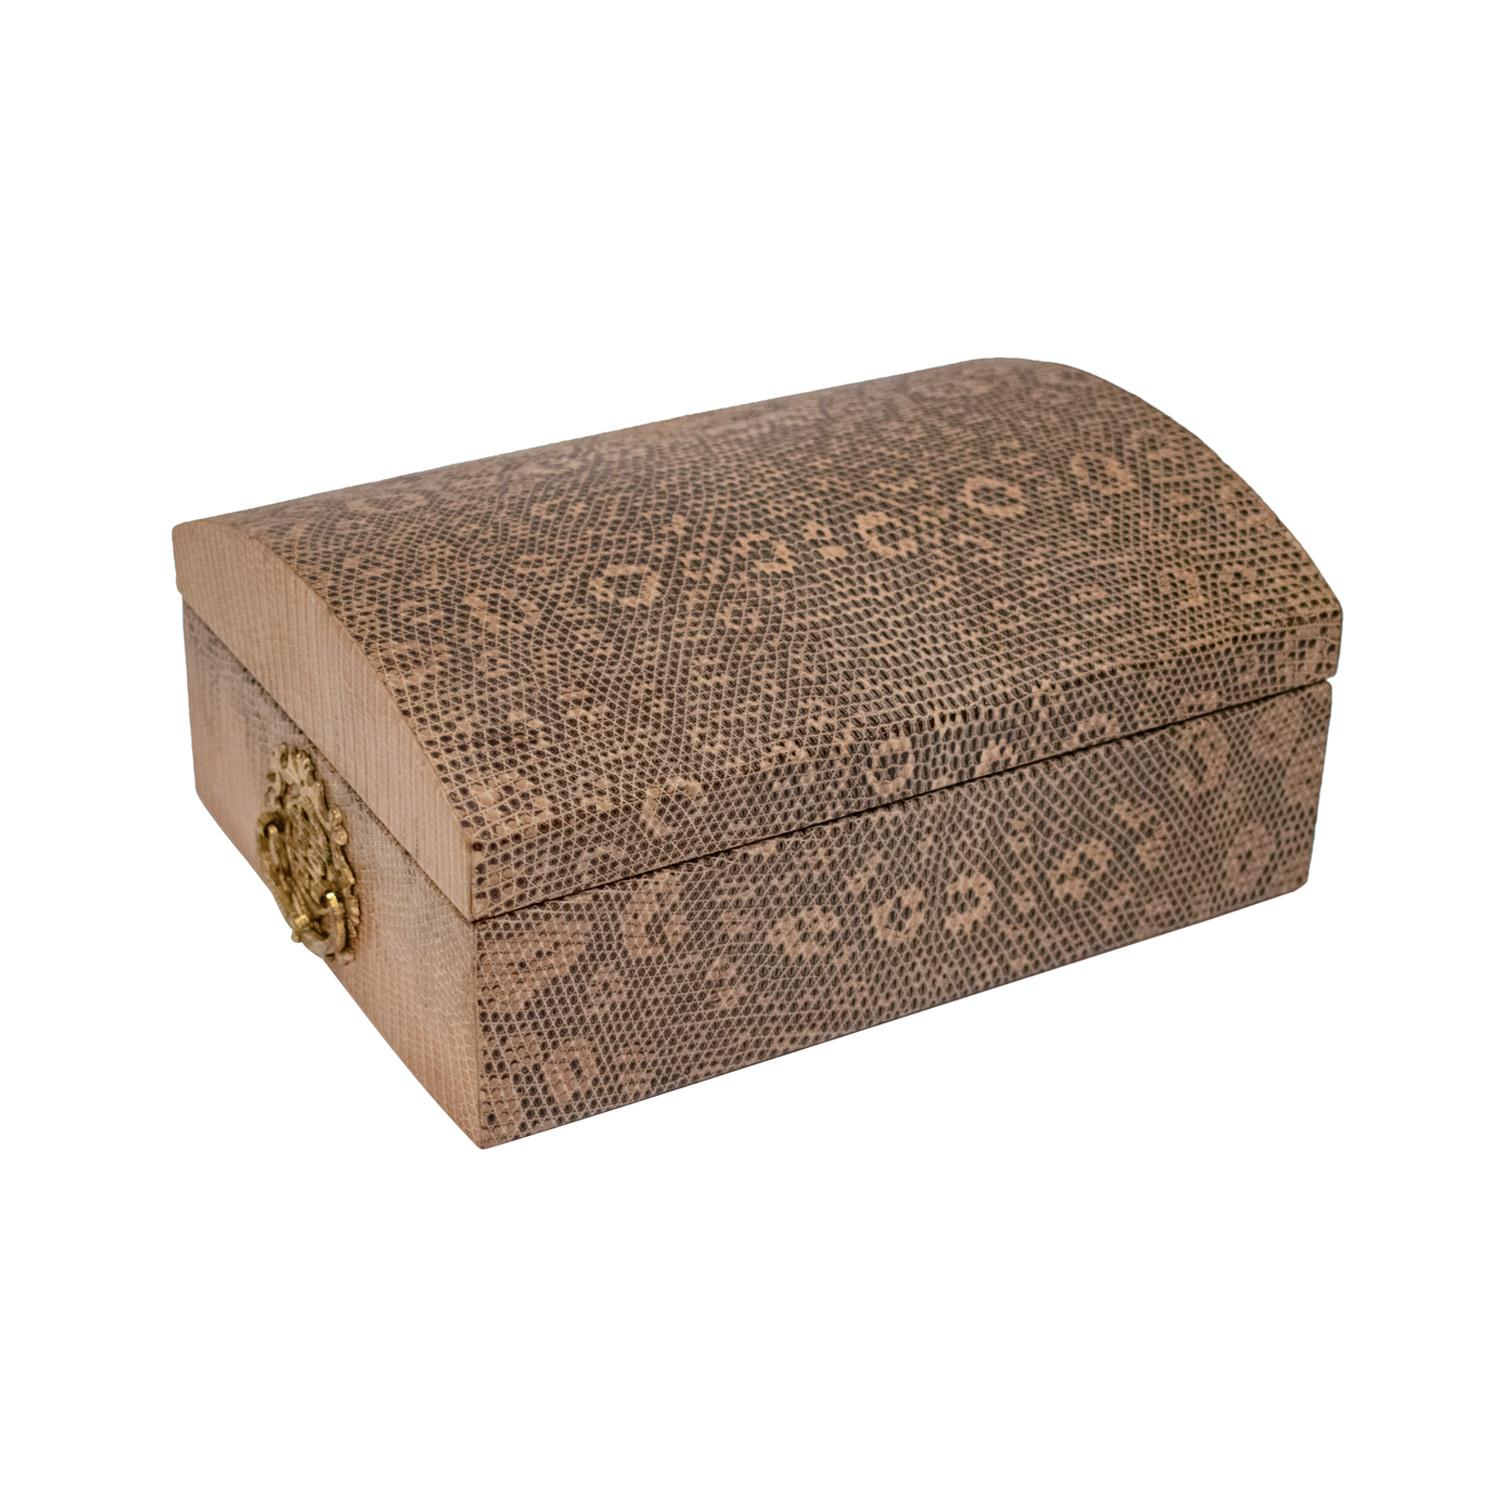 Beautifully crafted hinged box in reptile skin with brass Chinese accents on the sides, custom design, American 1970's.  Interior is covered in suede.  Bottom is covered in silk moire.  It’s a stunning accent piece with superb craftsmanship.